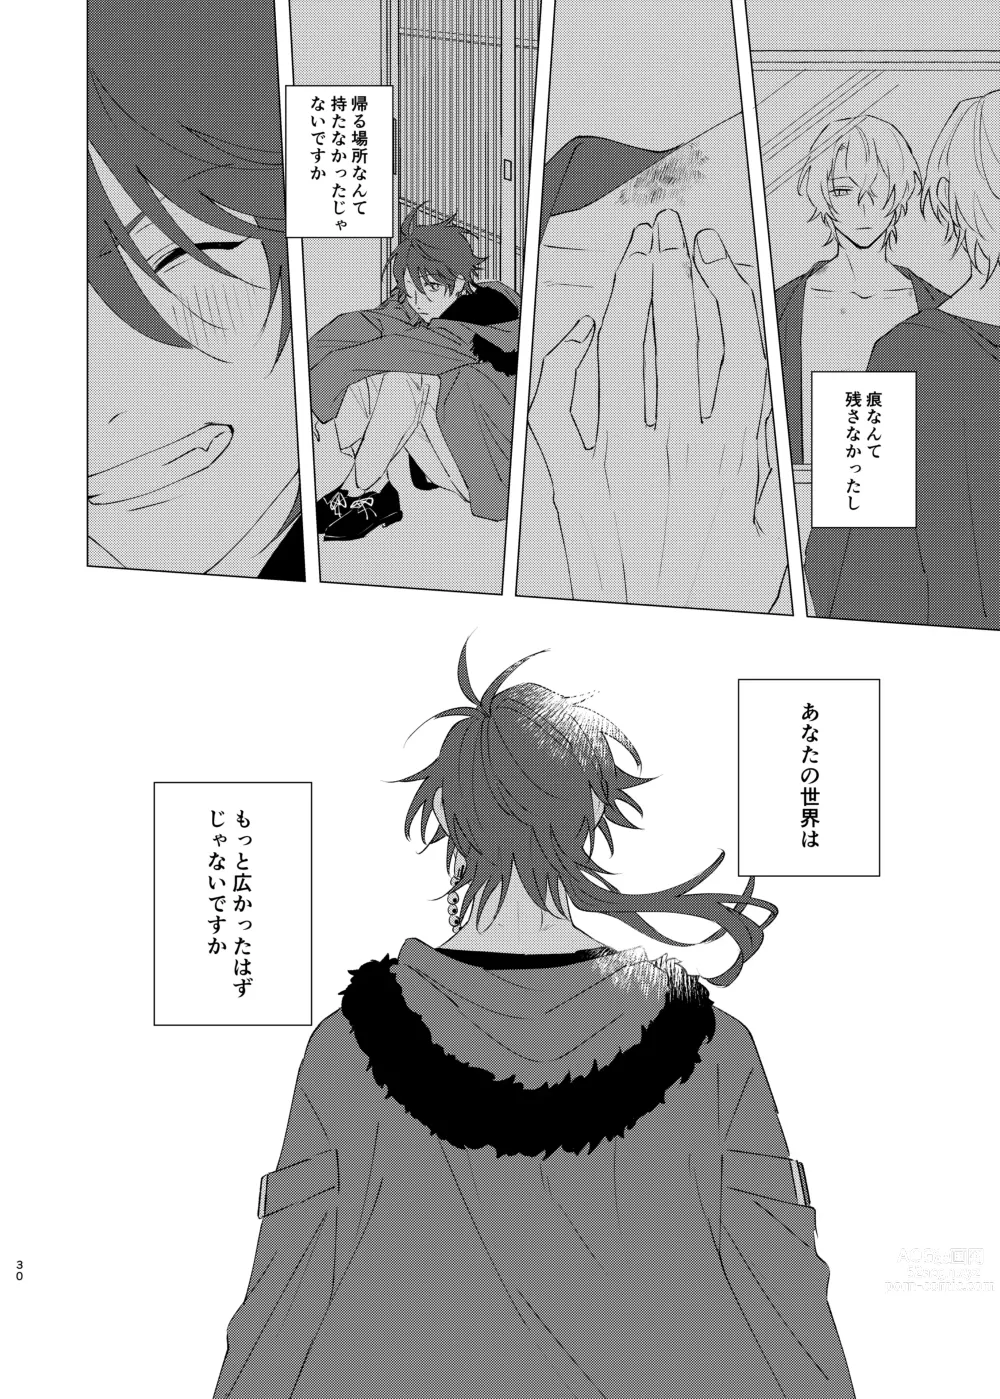 Page 28 of doujinshi Im leaving for good.